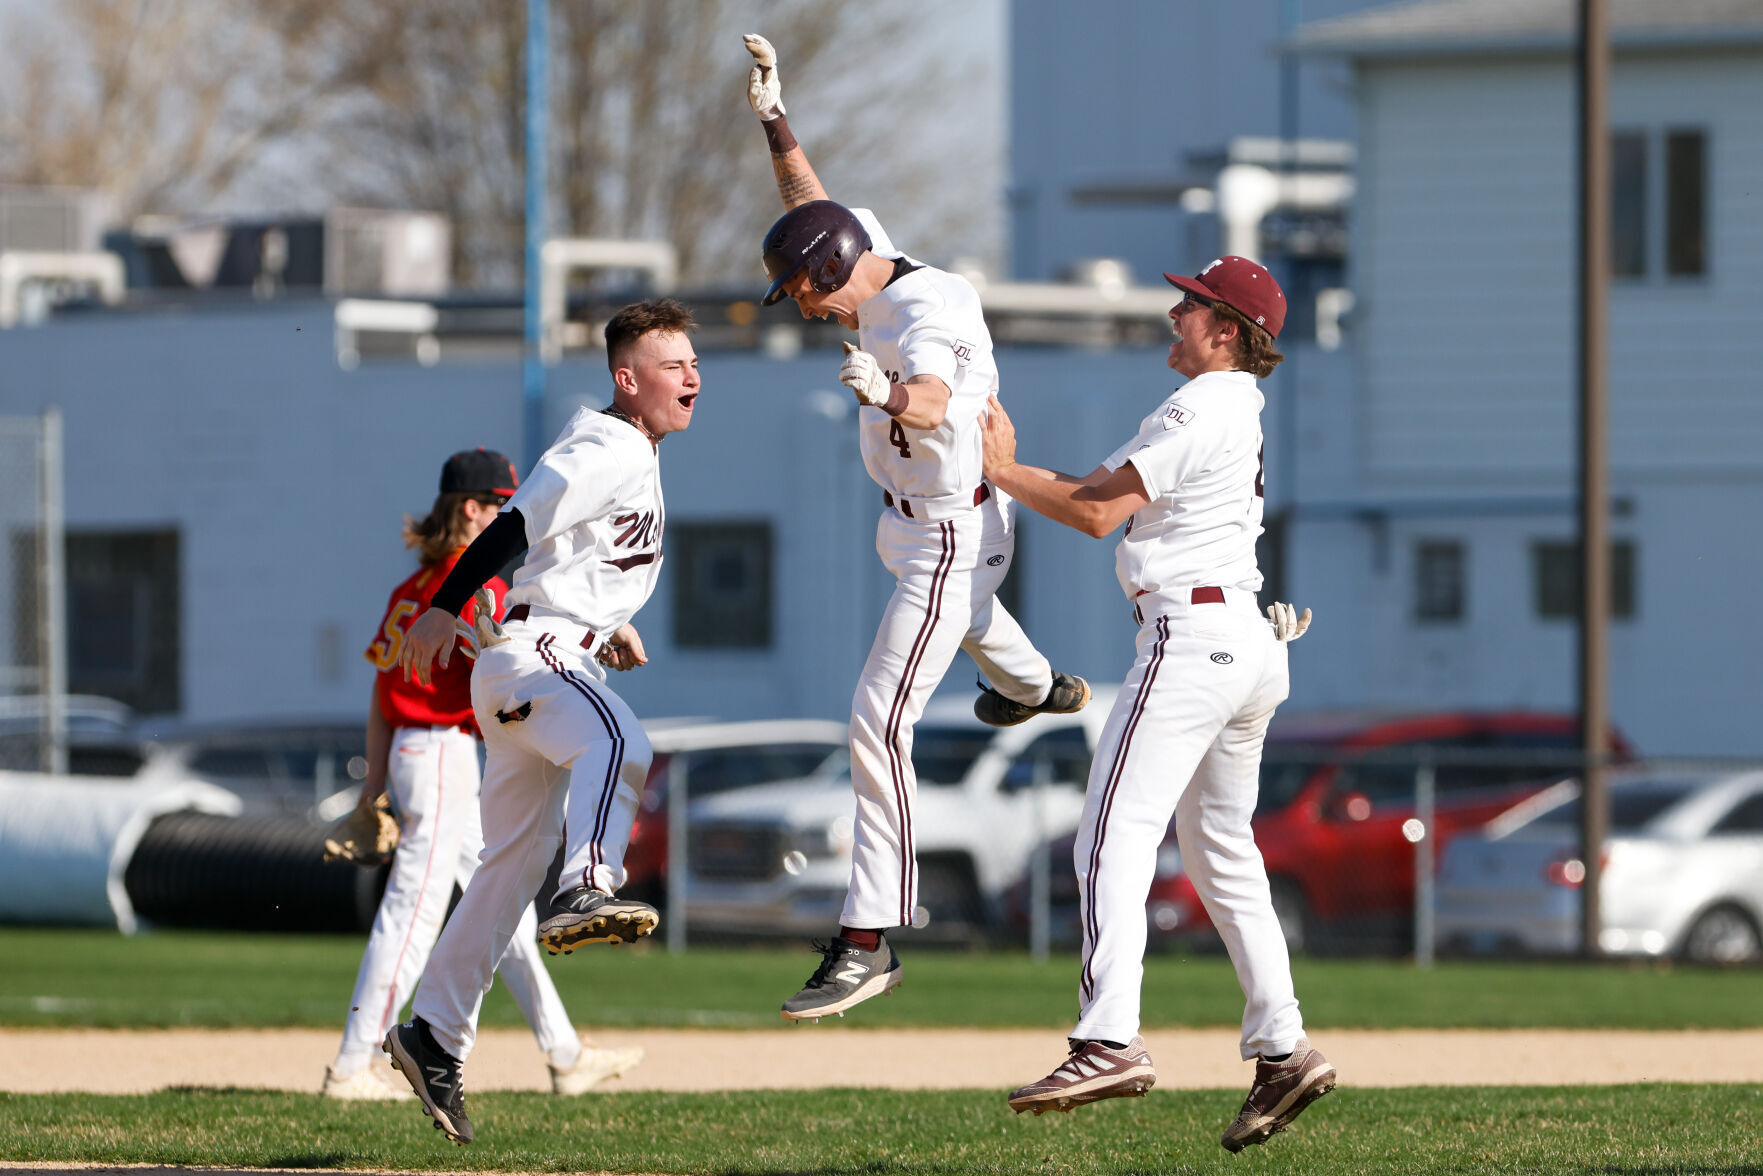 High School Baseball Recap: United Township Dominates with 10-2 Record & Impressive Victories on April 30